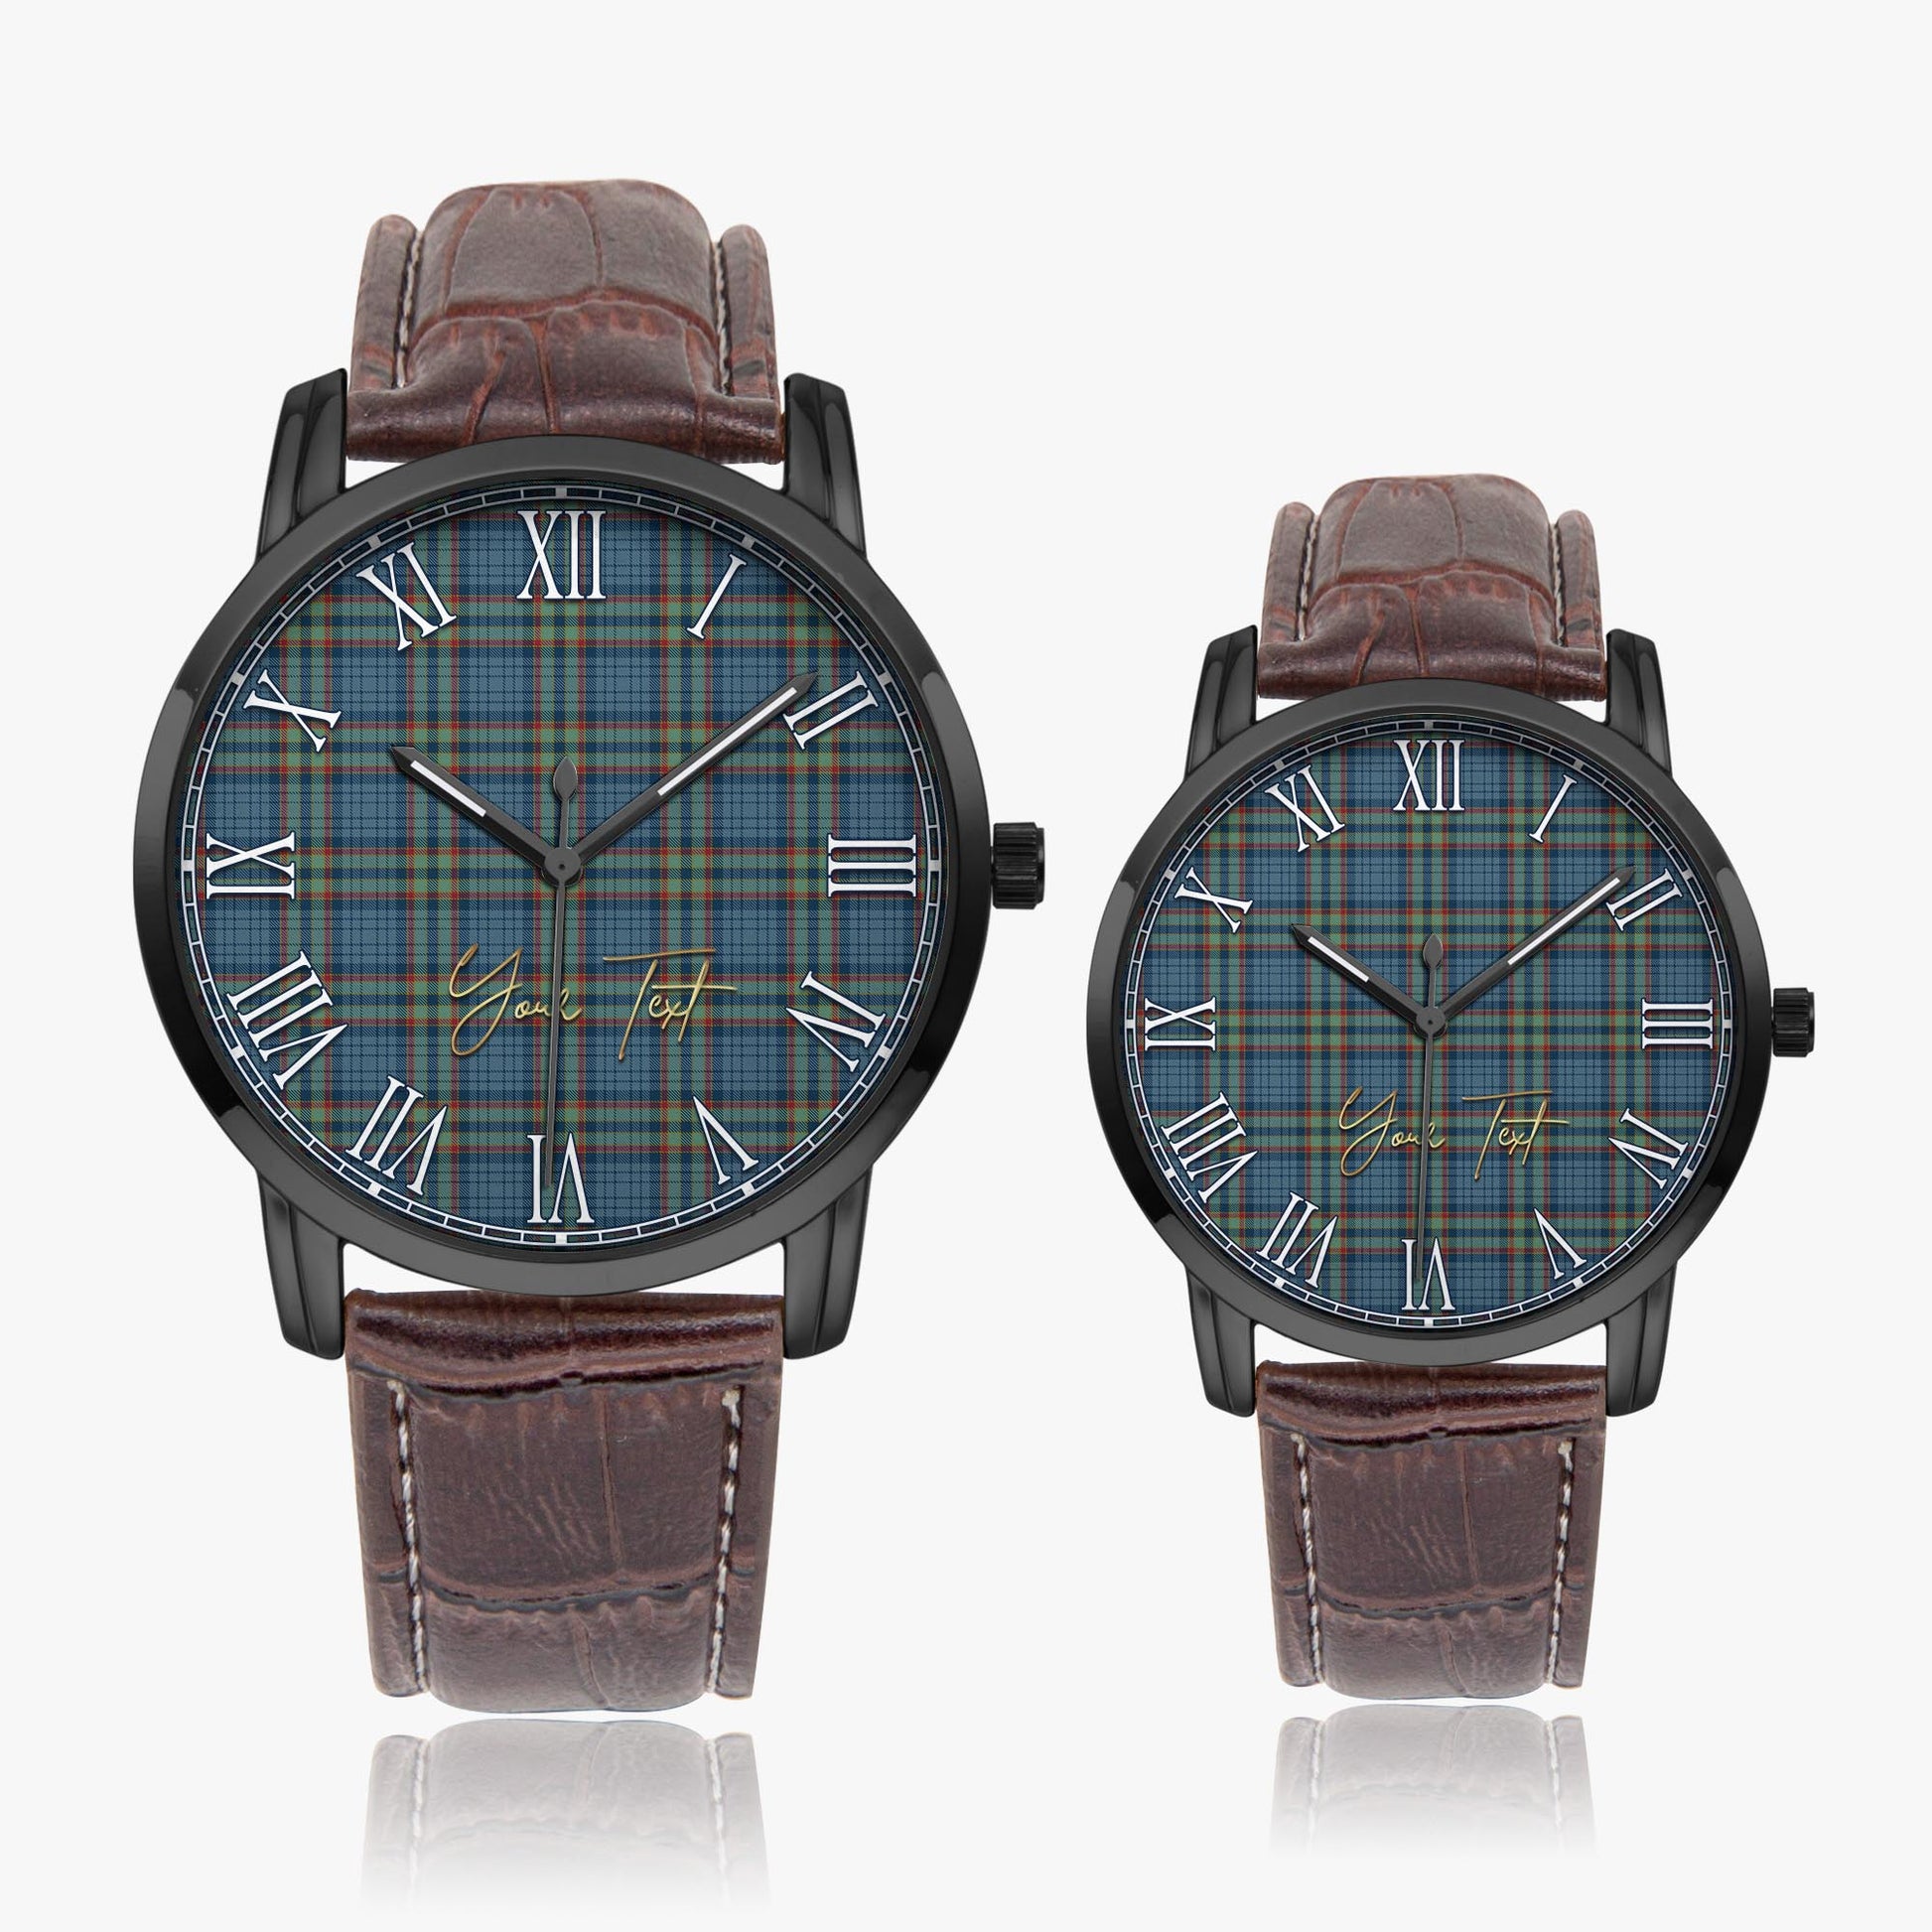 Ralston UK Tartan Personalized Your Text Leather Trap Quartz Watch Wide Type Black Case With Brown Leather Strap - Tartanvibesclothing